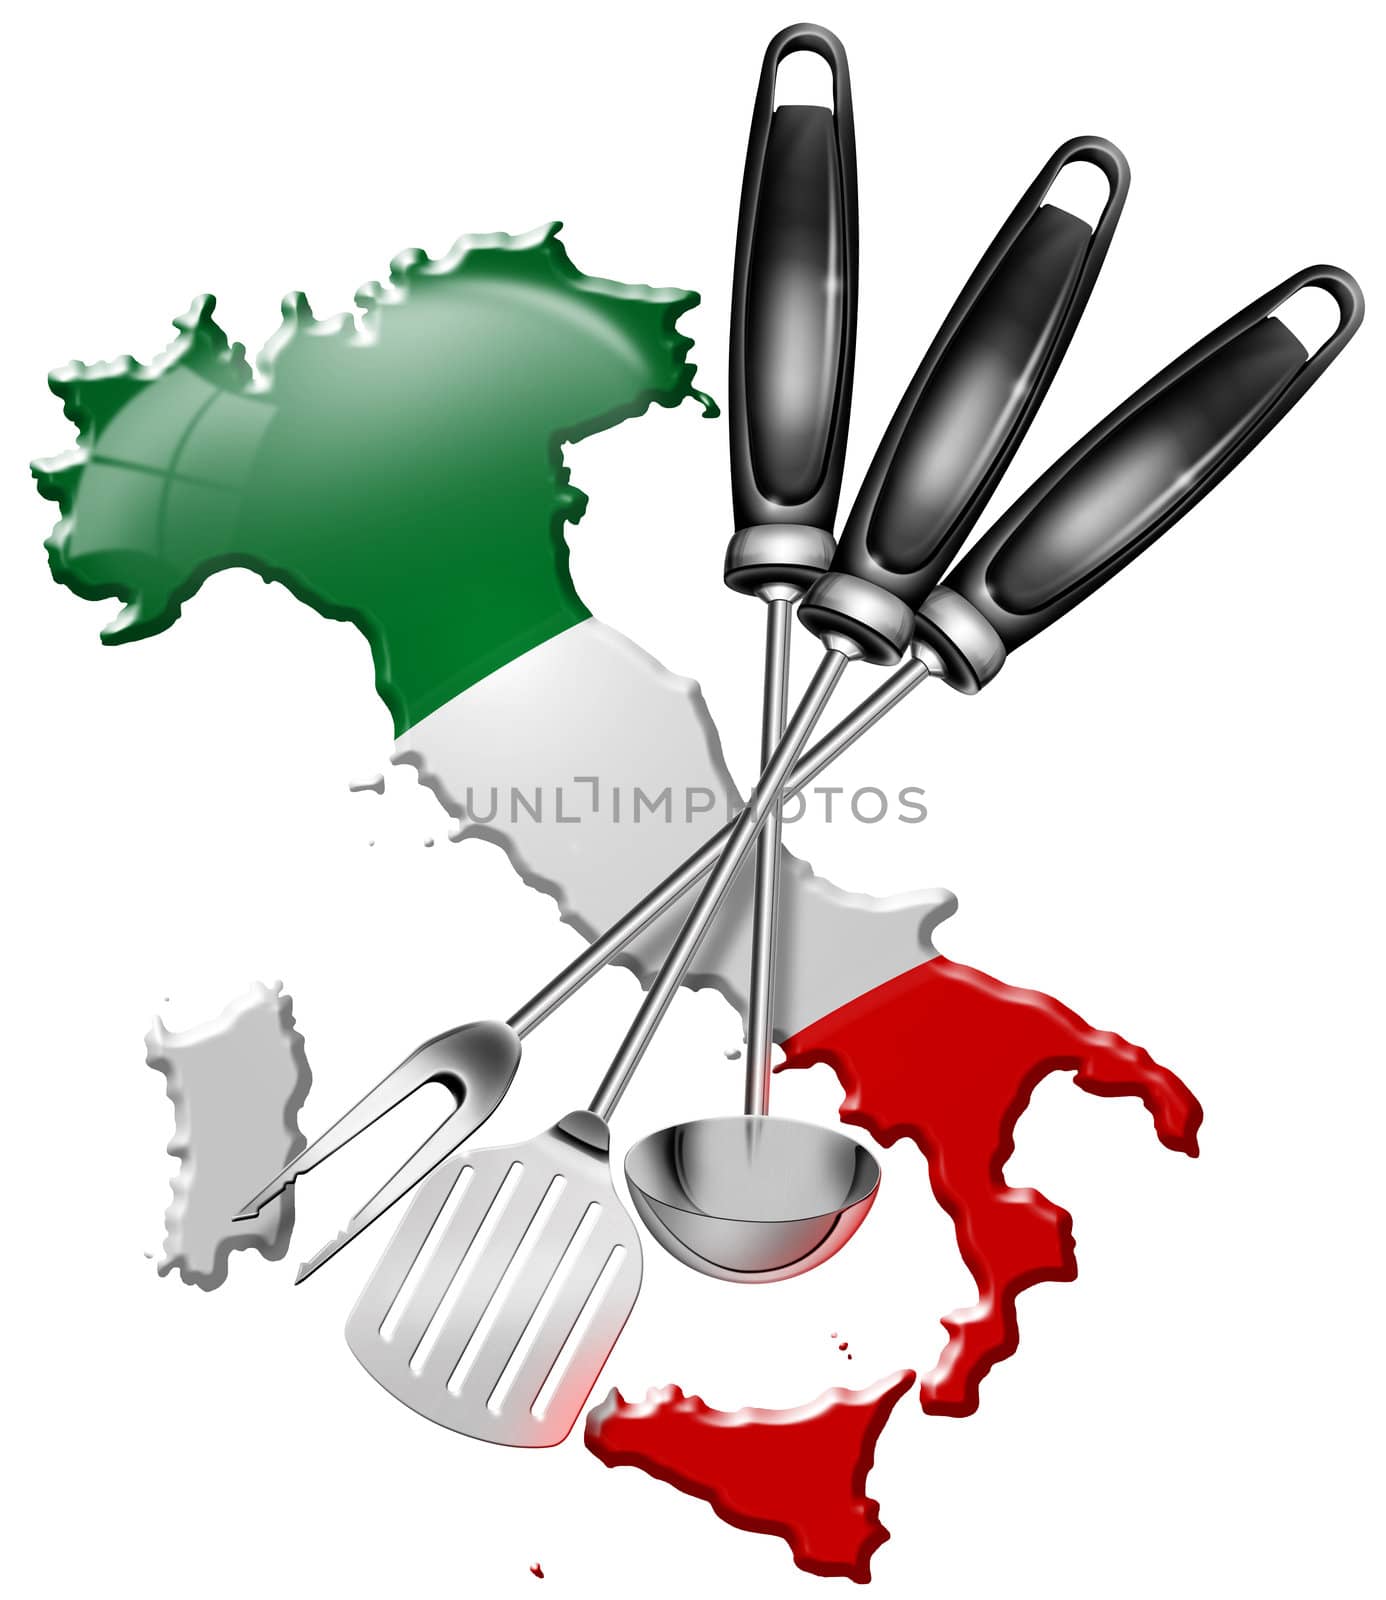 Concept of Italian cuisine with kitchen tools, italian territory and national flag